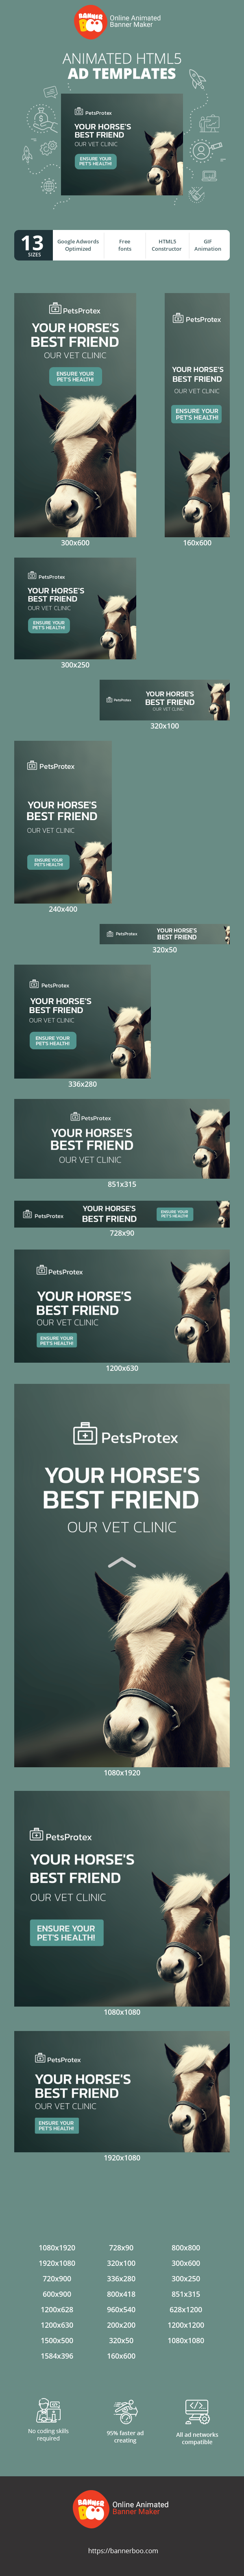 Banner ad template — Your Horse's Best Friend — Our Vet Clinic